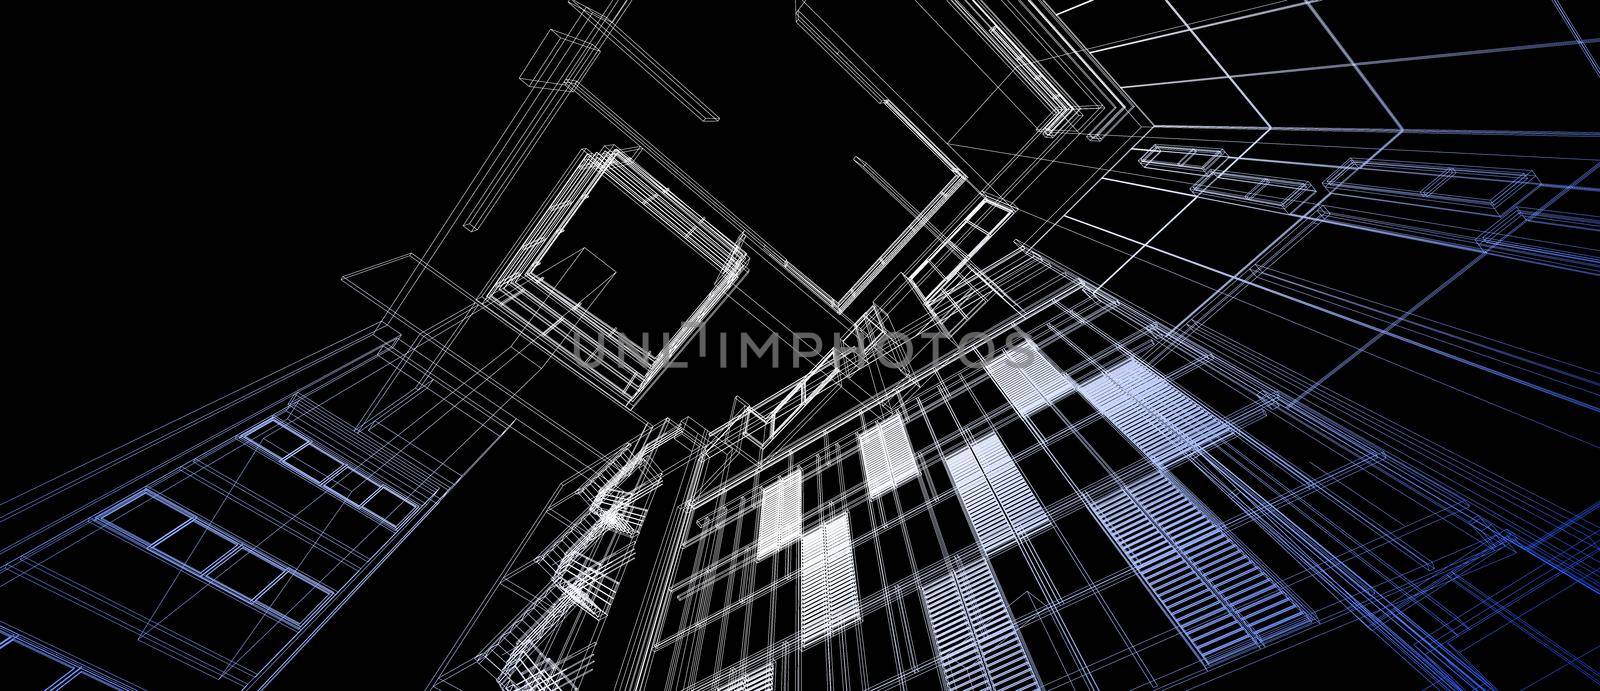 Architecture building space design concept 3d perspective gradient color wire frame rendering black background. For abstract background or wallpaper desktops computer technology design architectural theme. by Petrichor